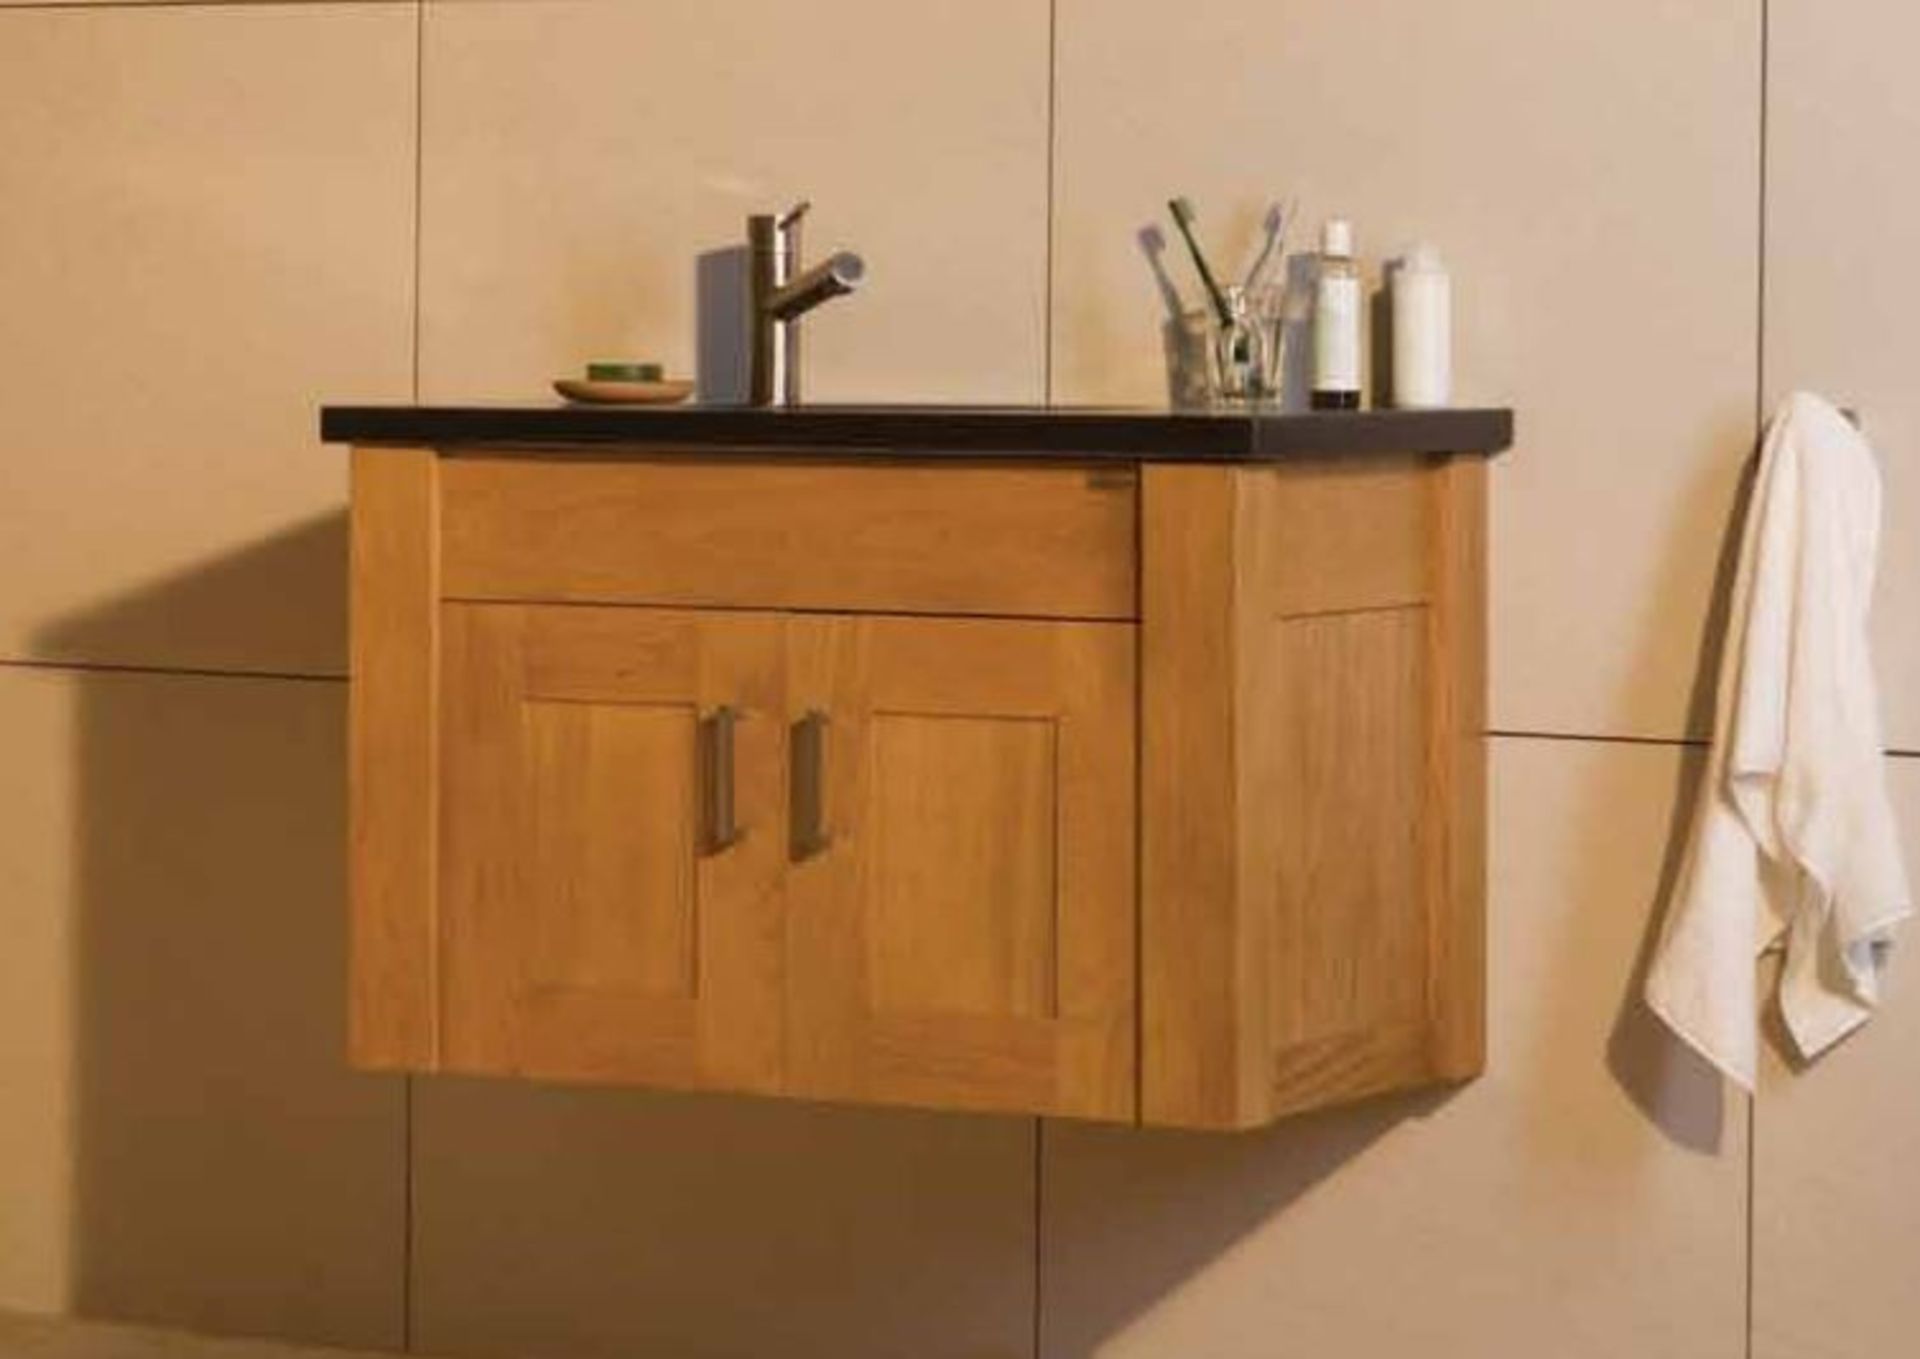 3 x Stonearth 'Entice' Wall Mounted Washstand - American Solid Oak - Original RRP £960 Each -